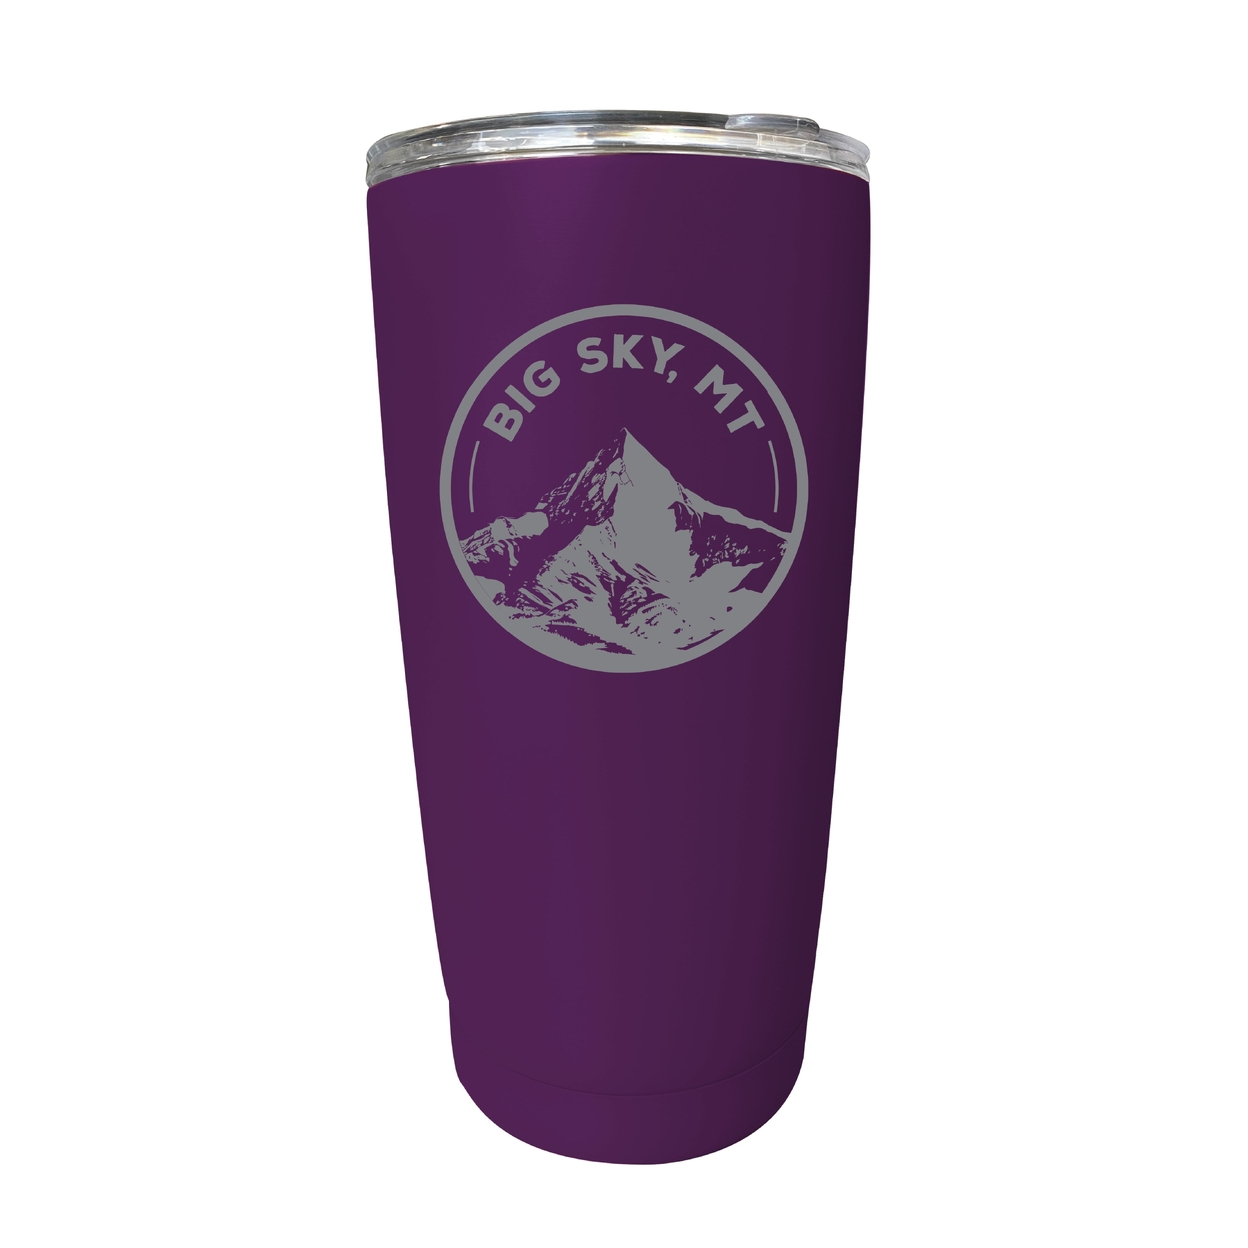 Big Sky Montana Souvenir 16 Oz Engraved Stainless Steel Insulated Tumbler - Black,,4-Pack